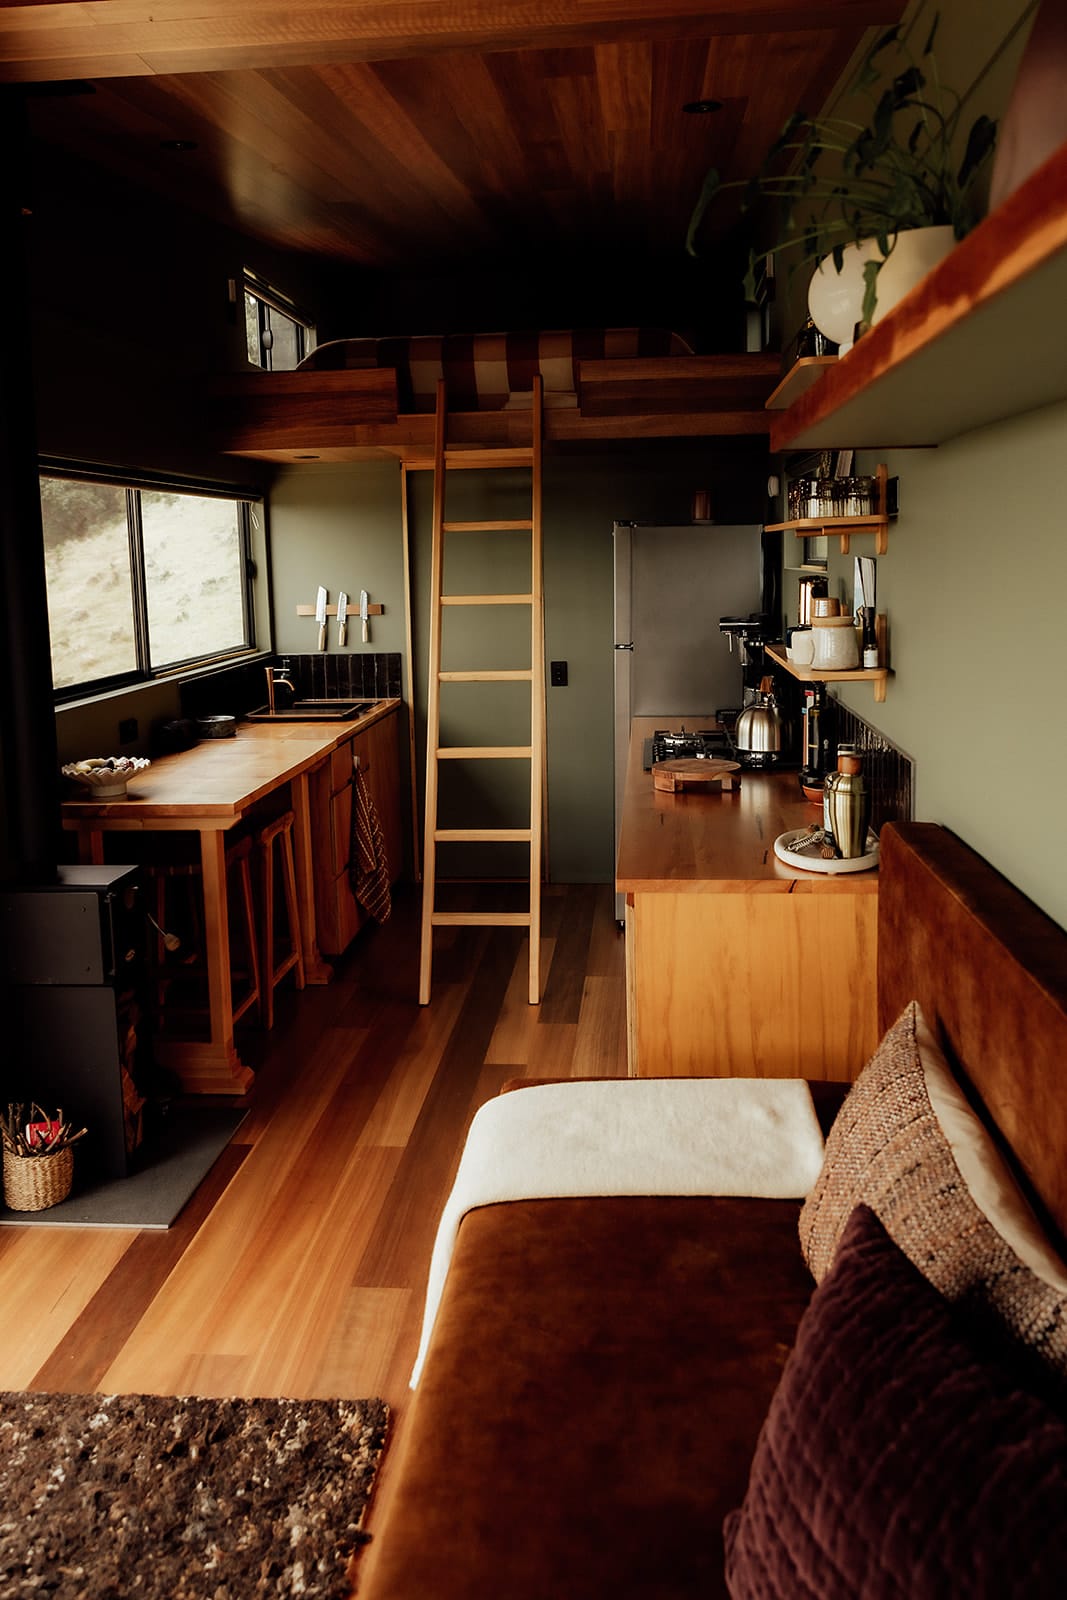 Candlebark Ridge. Copyright of Candlebark Ridge. Kitchen, dining and living area in tiny home. Black fireplace to left. Timber floors and joinery with green walls. 